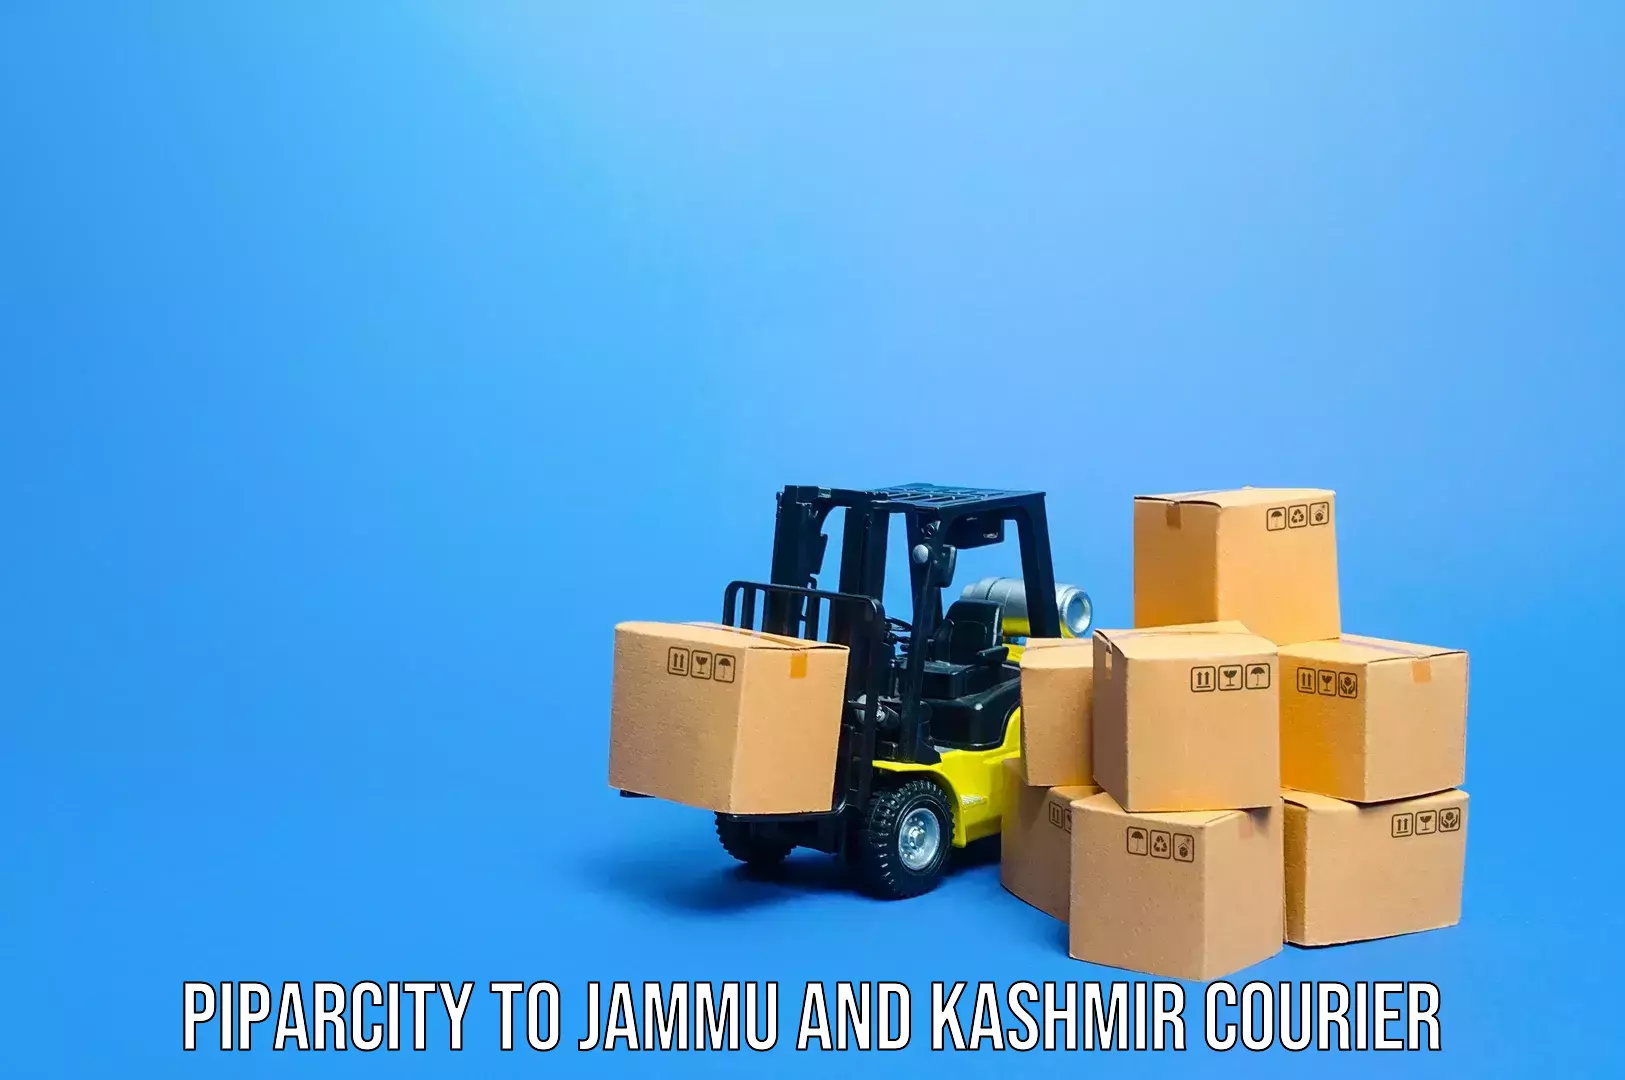 Baggage transport scheduler Piparcity to Jammu and Kashmir